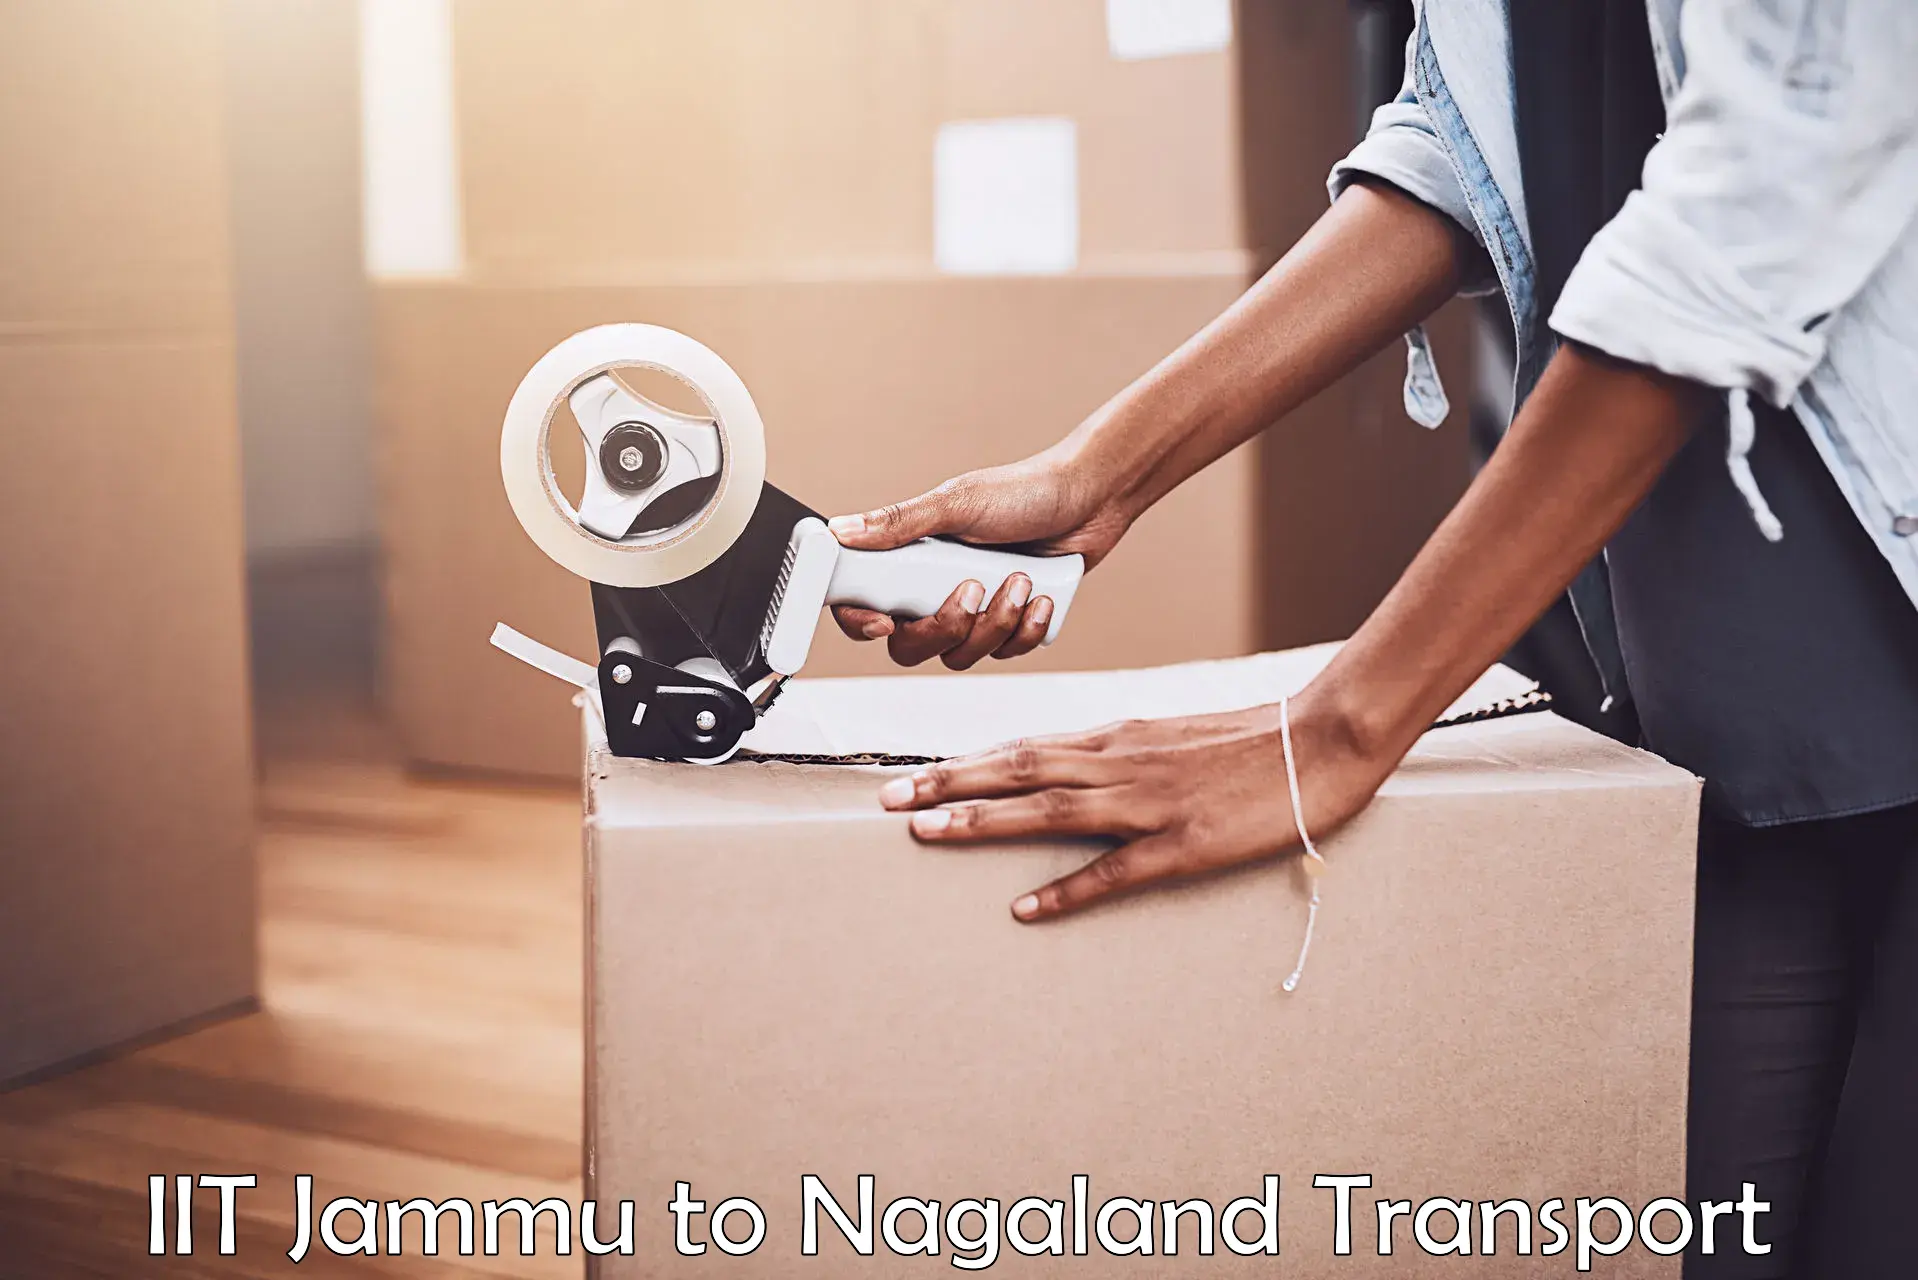 Container transportation services IIT Jammu to Nagaland